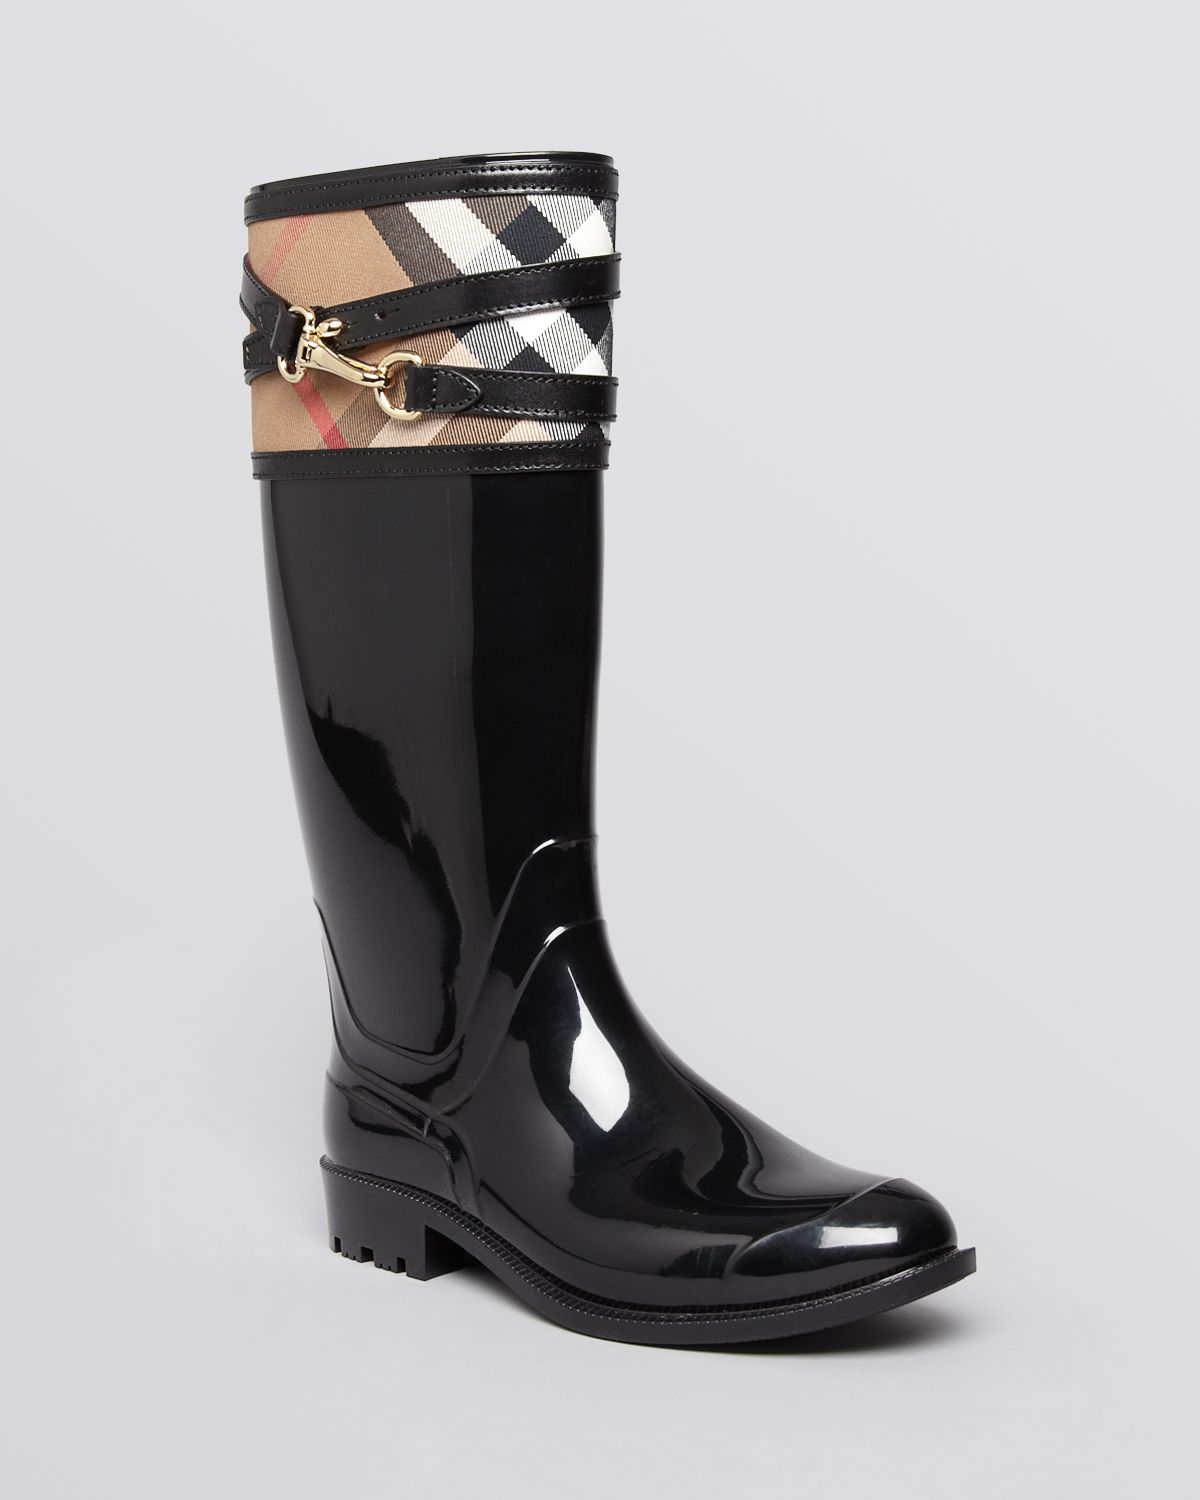 burberry boots nordstrom